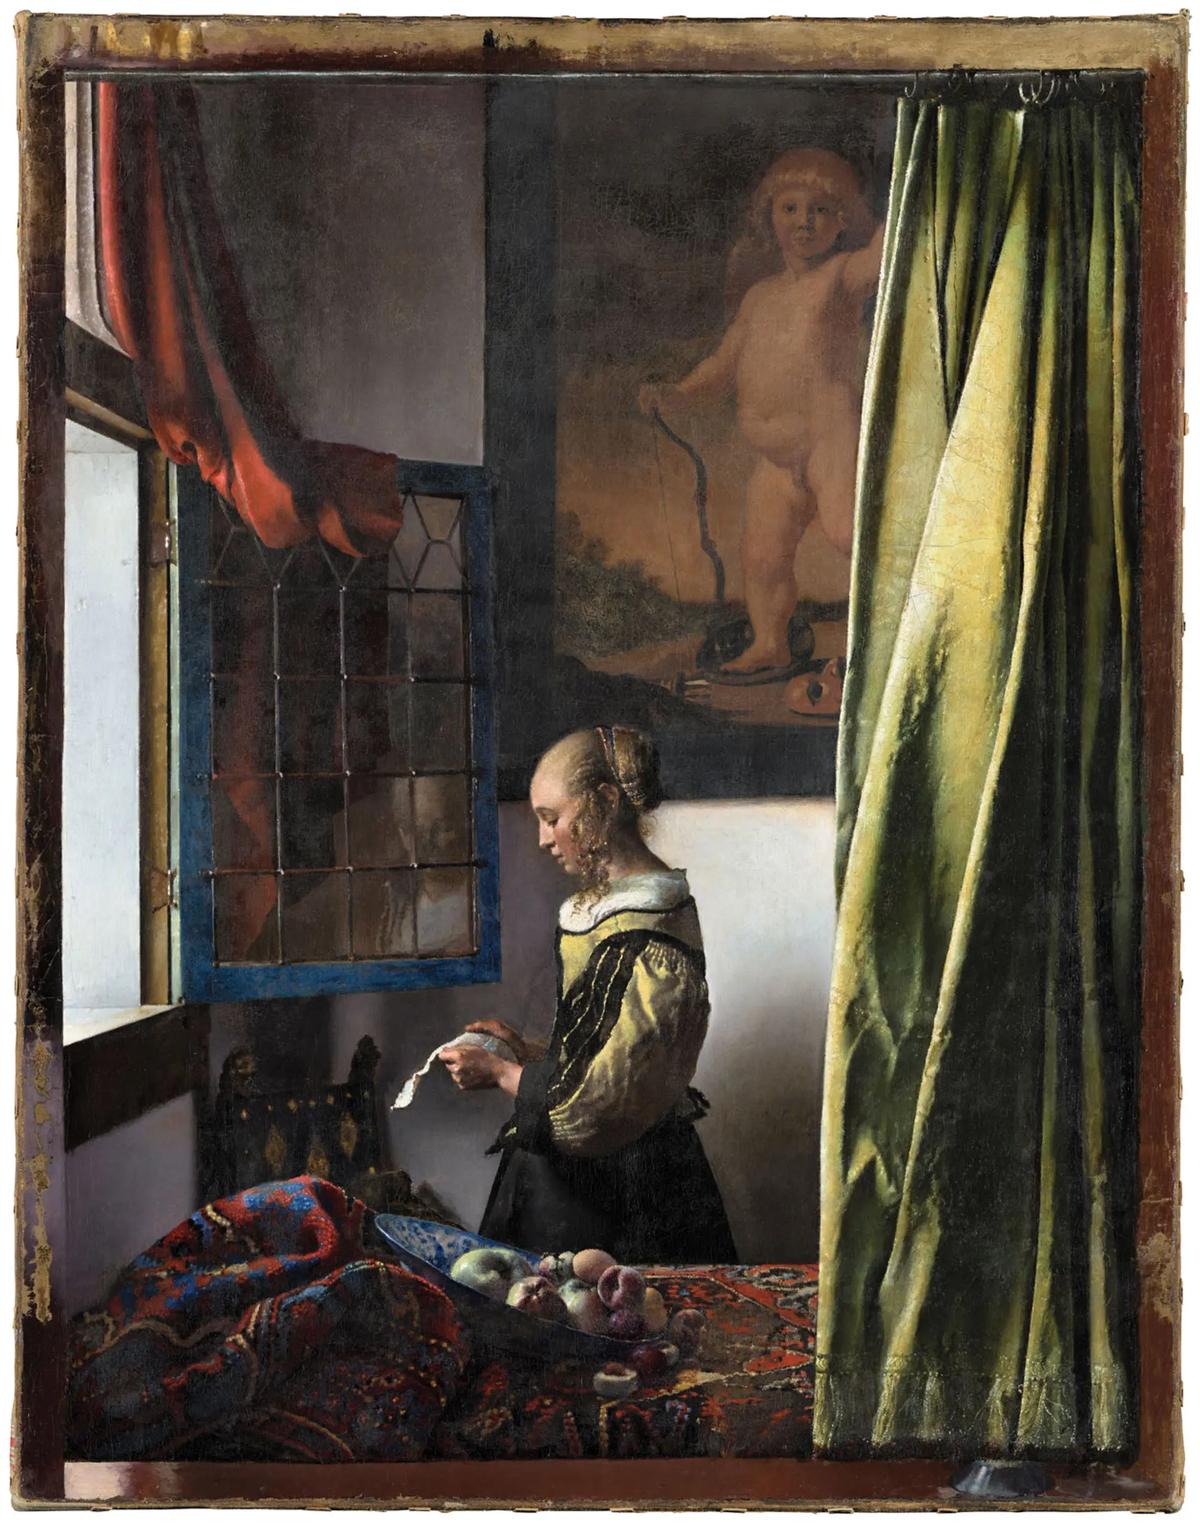 The newly restored Girl Reading a Letter at an Open Window (around 1657-59) by Johannes Vermeer is in the show © Gemäldegalerie Alte Meister, SKD, Photo: Wolfgang Kreische